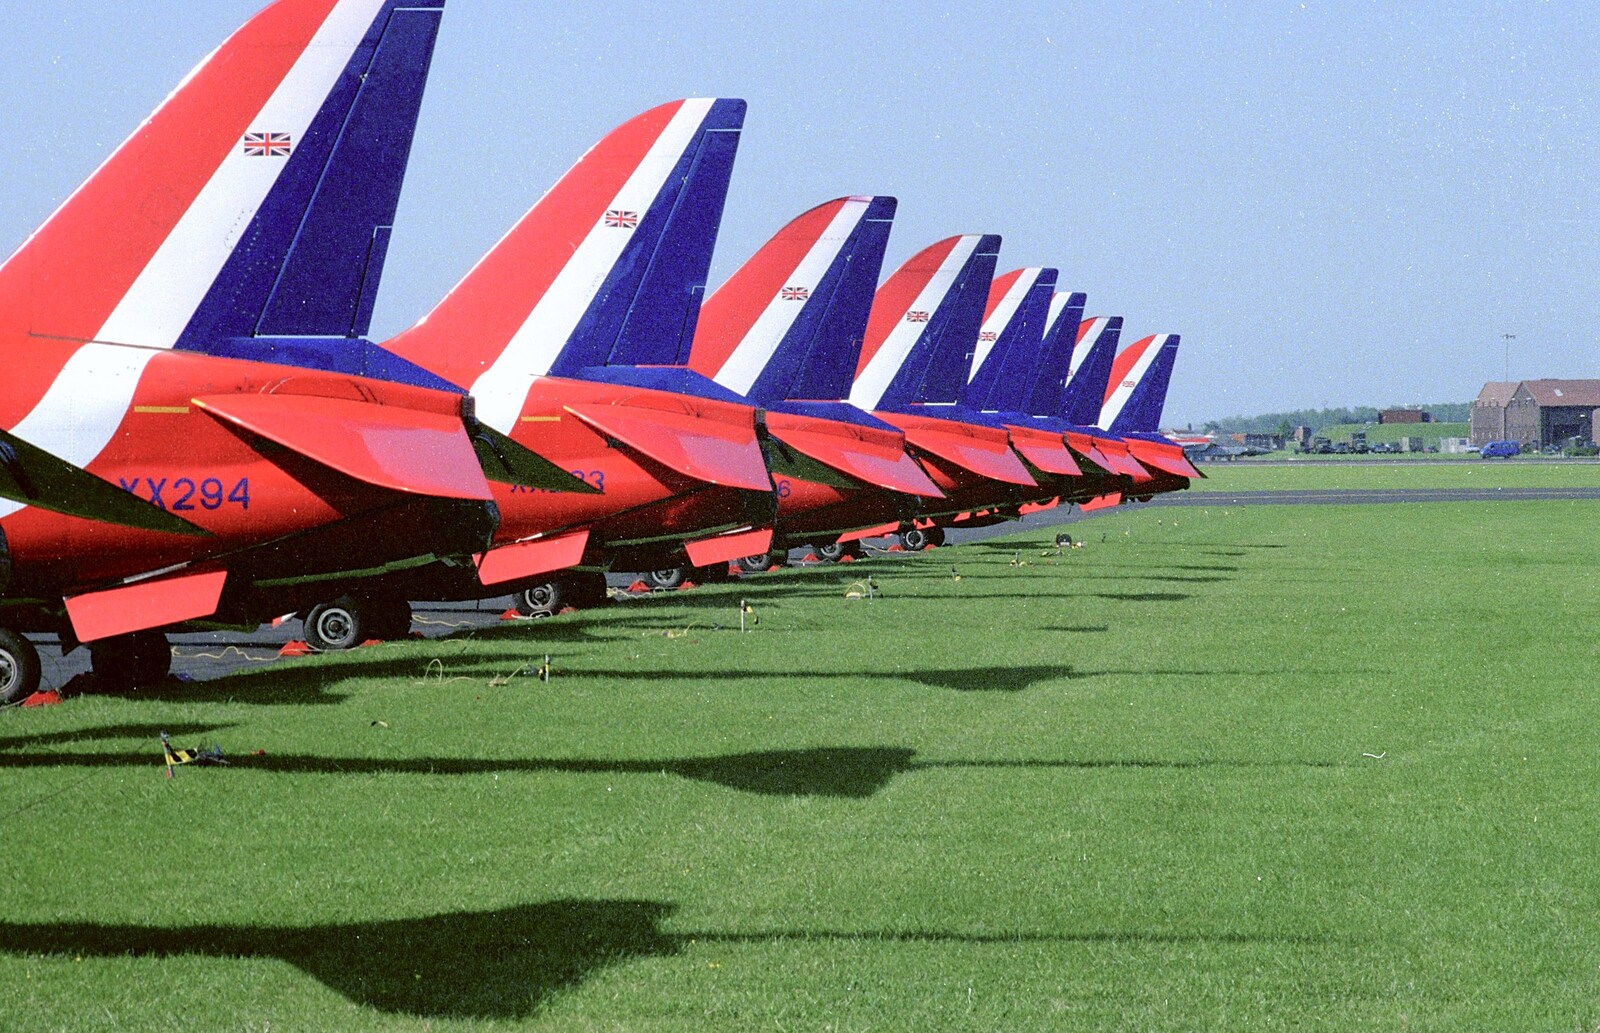 Red Arrows tails from The Mildenhall Air Fete, Mildenhall, Suffolk - 29th May 1994